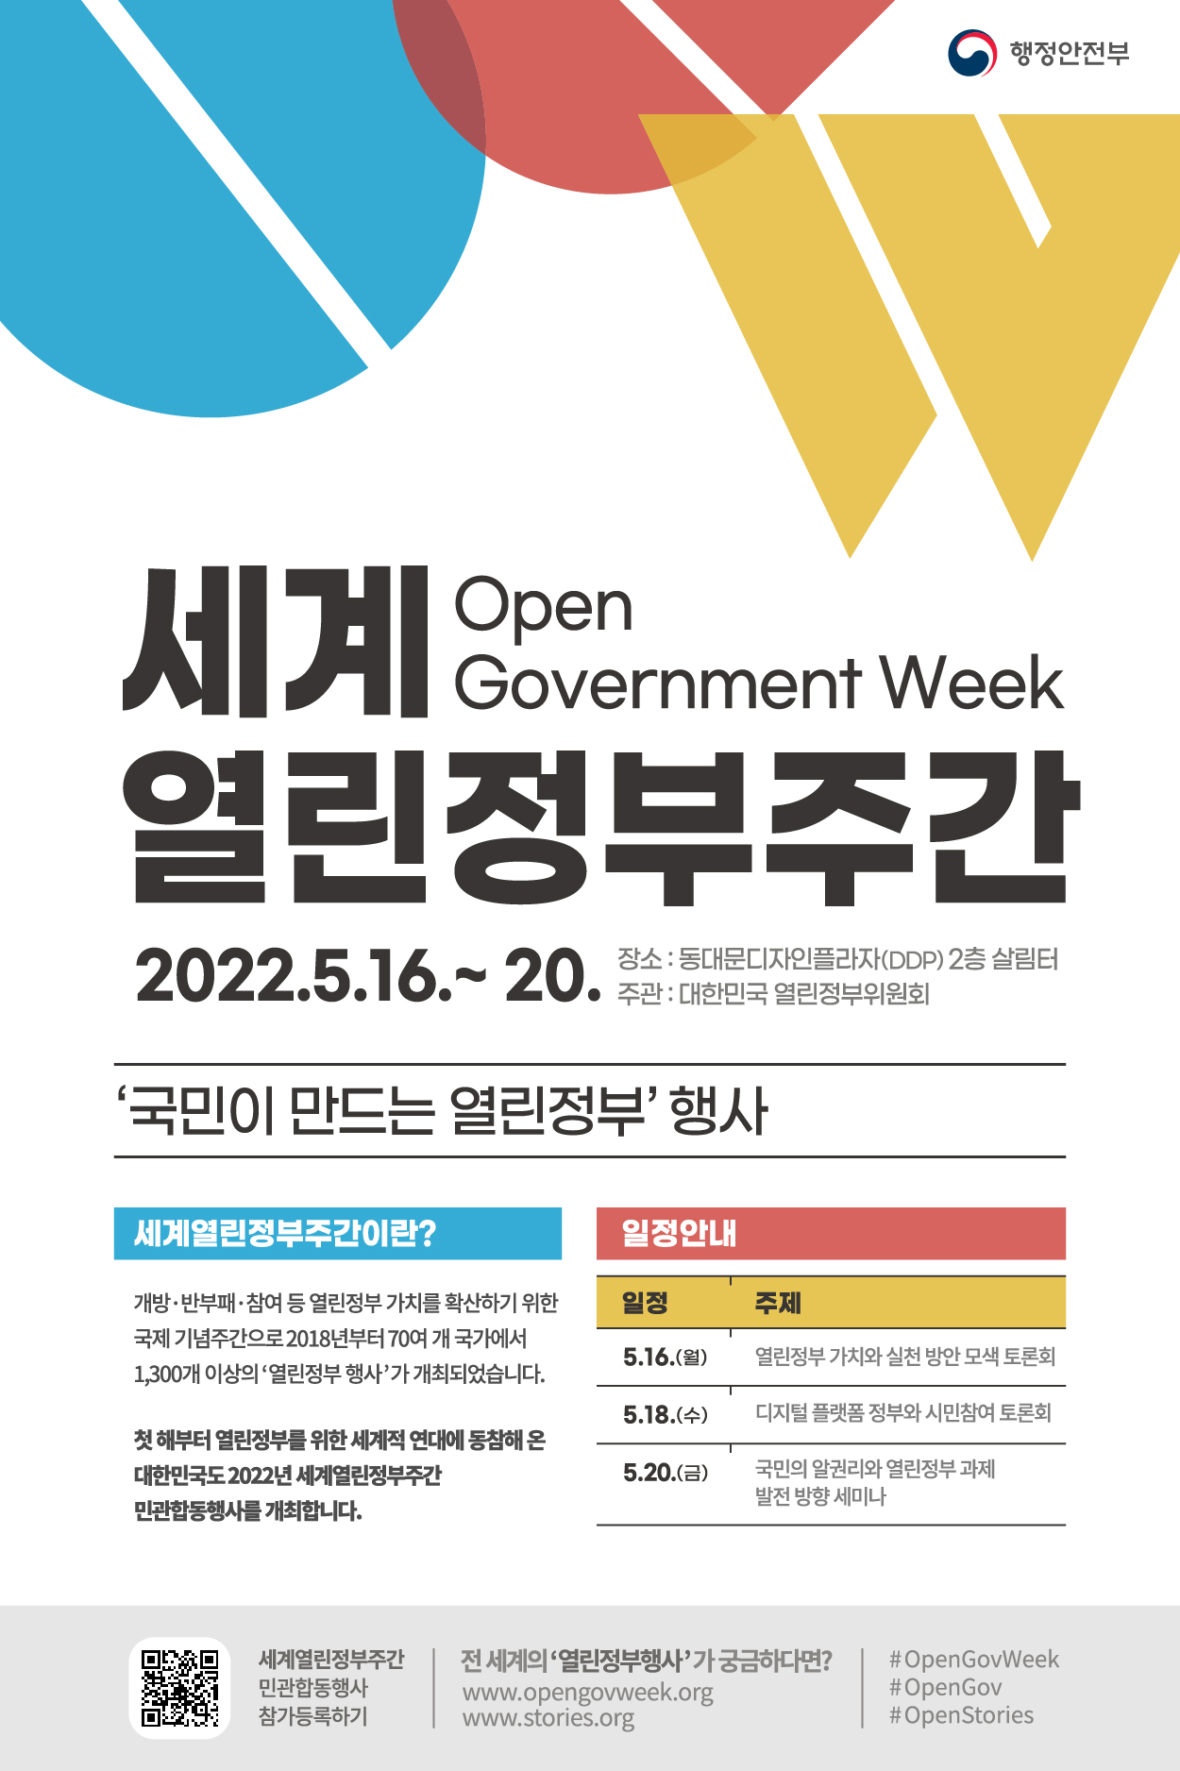 Open Net Co-hosts Open Government Week as Part of the Open Government Partnership